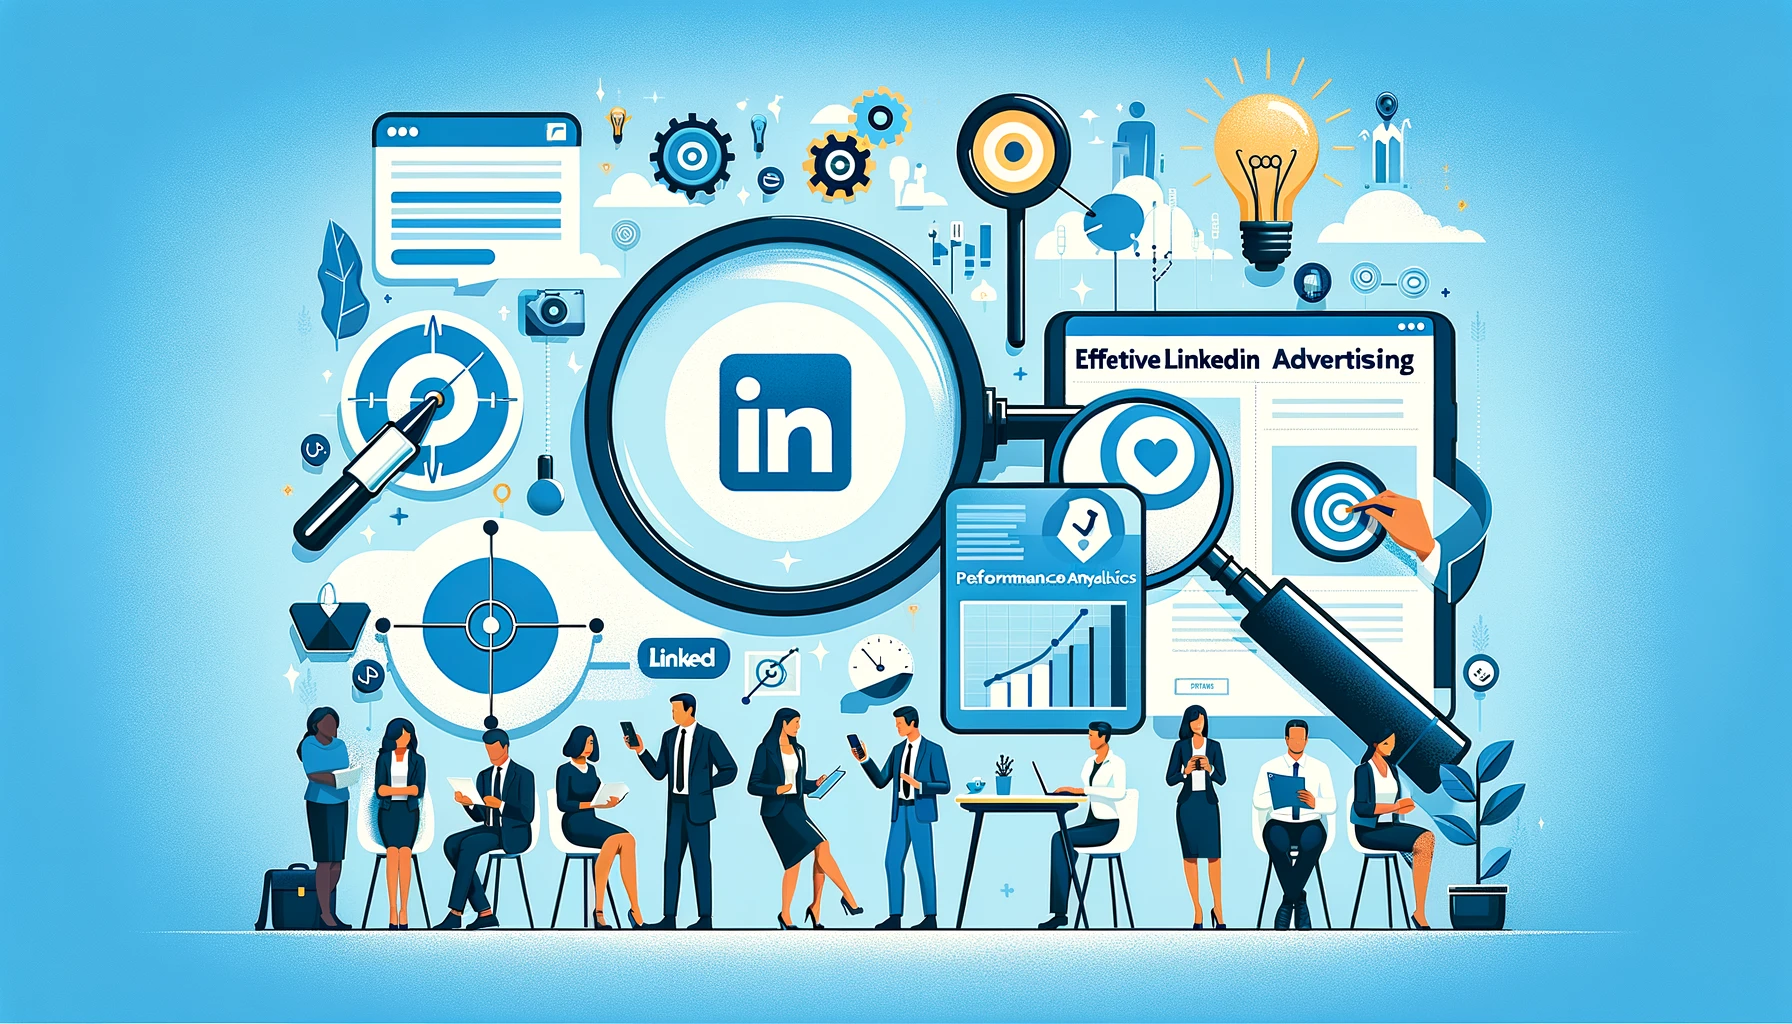 Graphic representation of key LinkedIn Advertising Tips, including audience targeting, engaging content, and performance analytics.